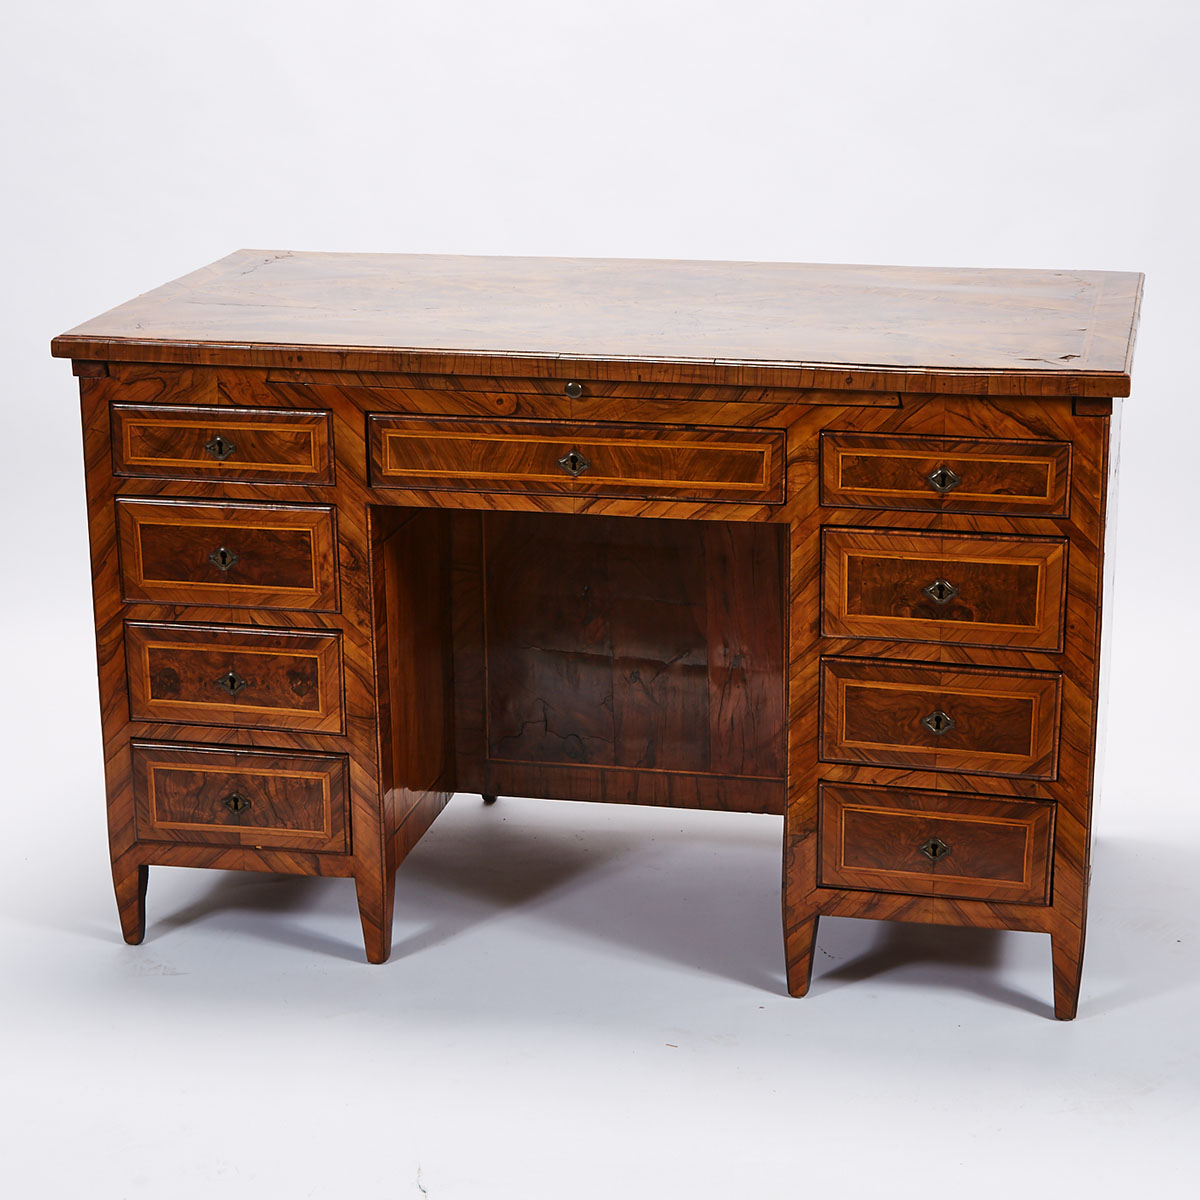 French Kingwood Parquetry Extension Desk, 19th century